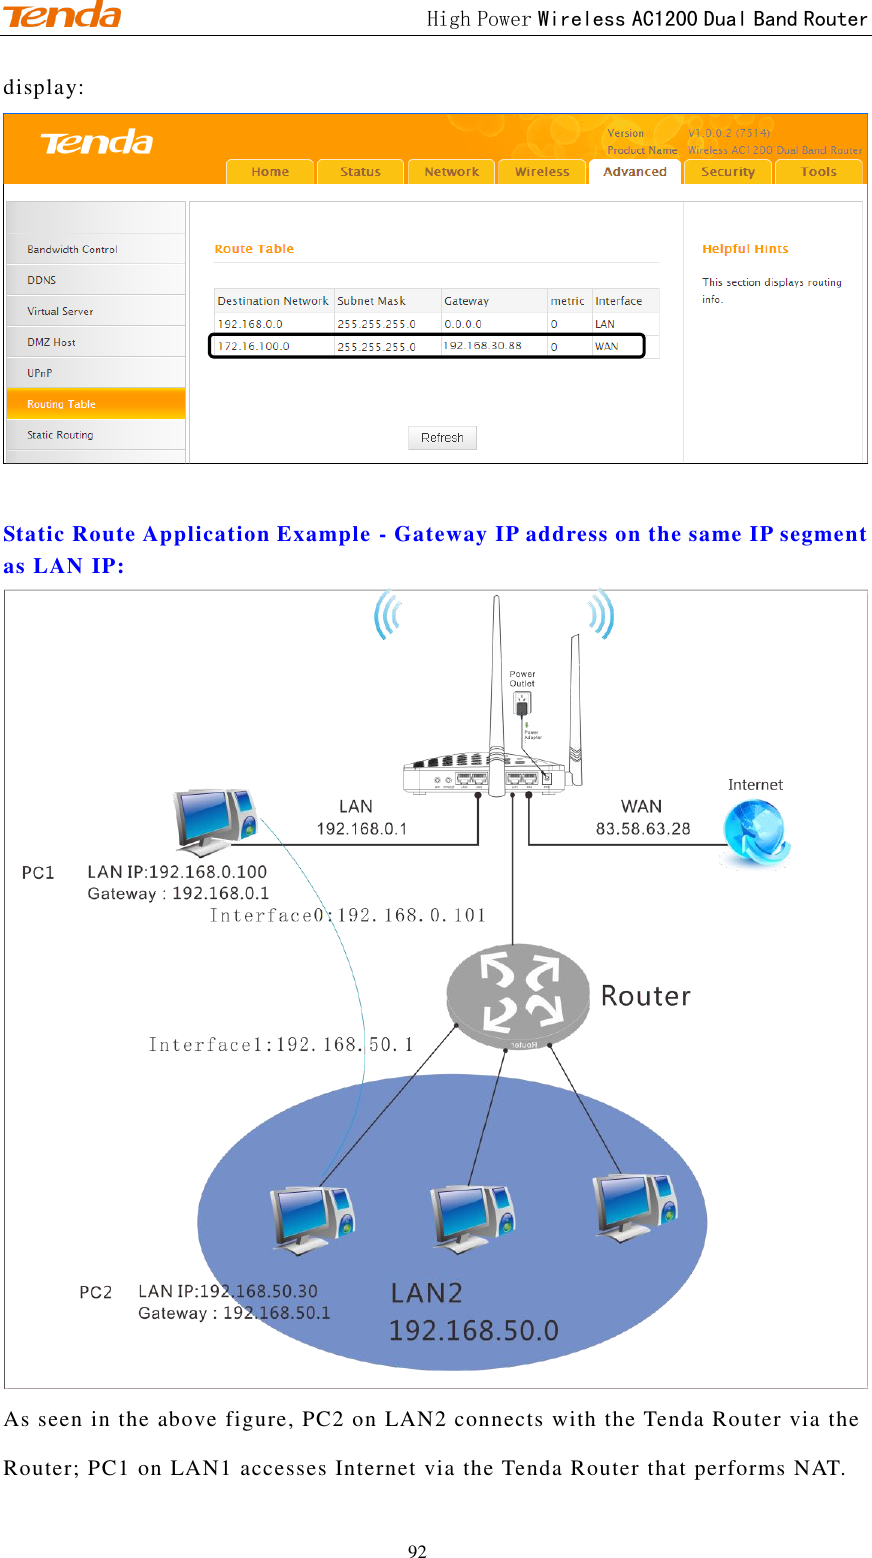                                             High Power Wireless AC1200 Dual Band Router 92 display:  Static Route Application Example - Gateway IP address on the same IP segment as LAN IP:  As seen in the above figure, PC2 on LAN2 connects with the Tenda Router via the Router; PC1 on LAN1 accesses Internet via the Tenda Router that performs NAT. 